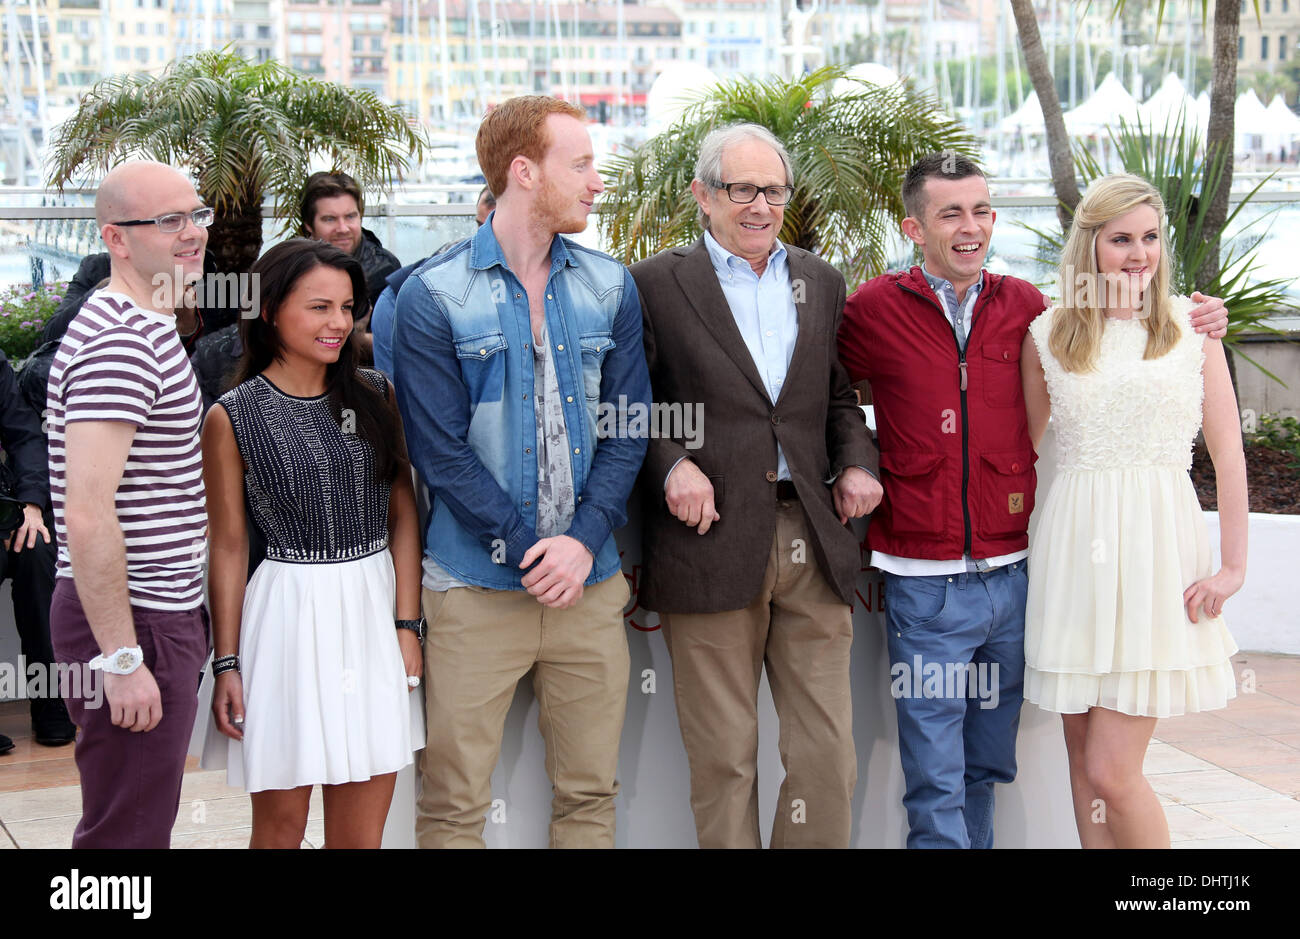 Charlie Maclean, Gary Maitland, Jasmin Riggins, William Ruane, Ken Loach, Paul Brannigan, Siobhan Reilly 'The Angel's Share' photocall during the 65th Cannes Film Festival Cannes, France - 22.05.12 Stock Photo